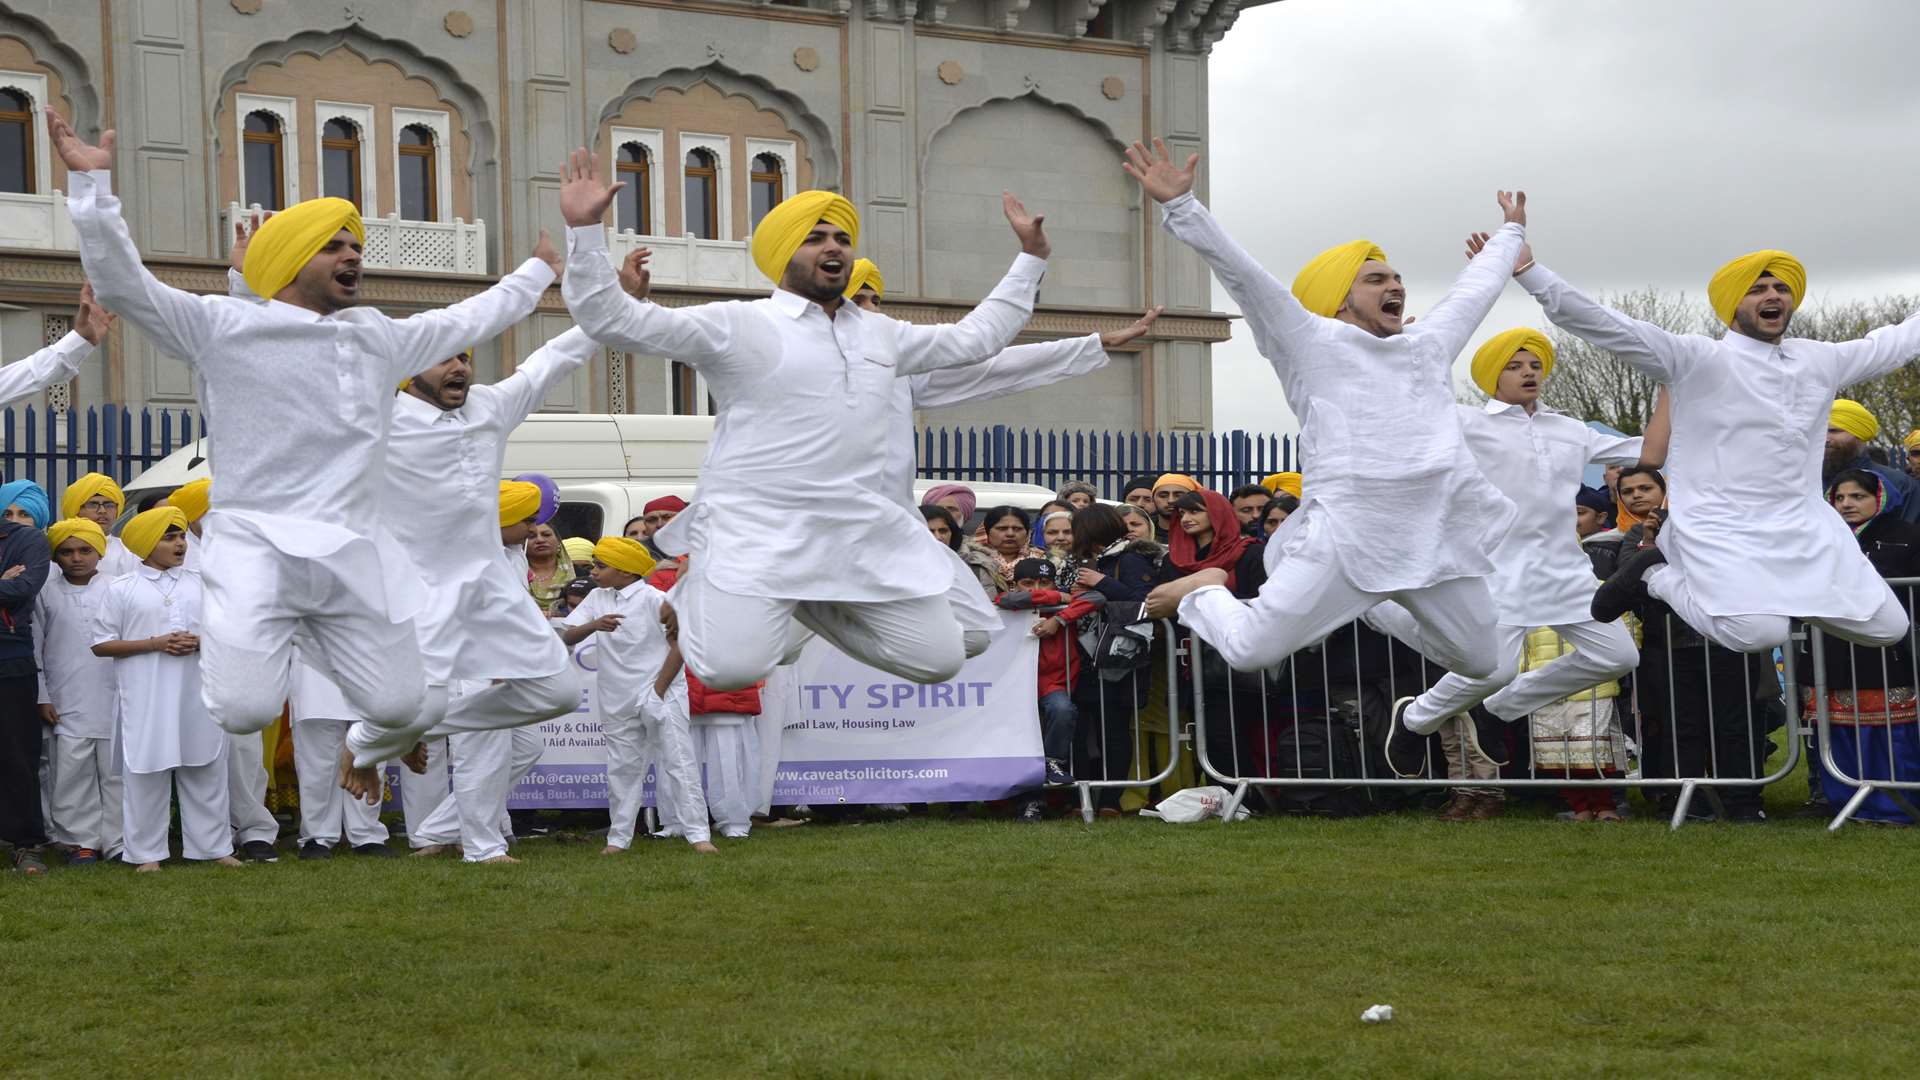 Thousands Of People Packed Out Gravesends Streetsfor A Huge Sikh